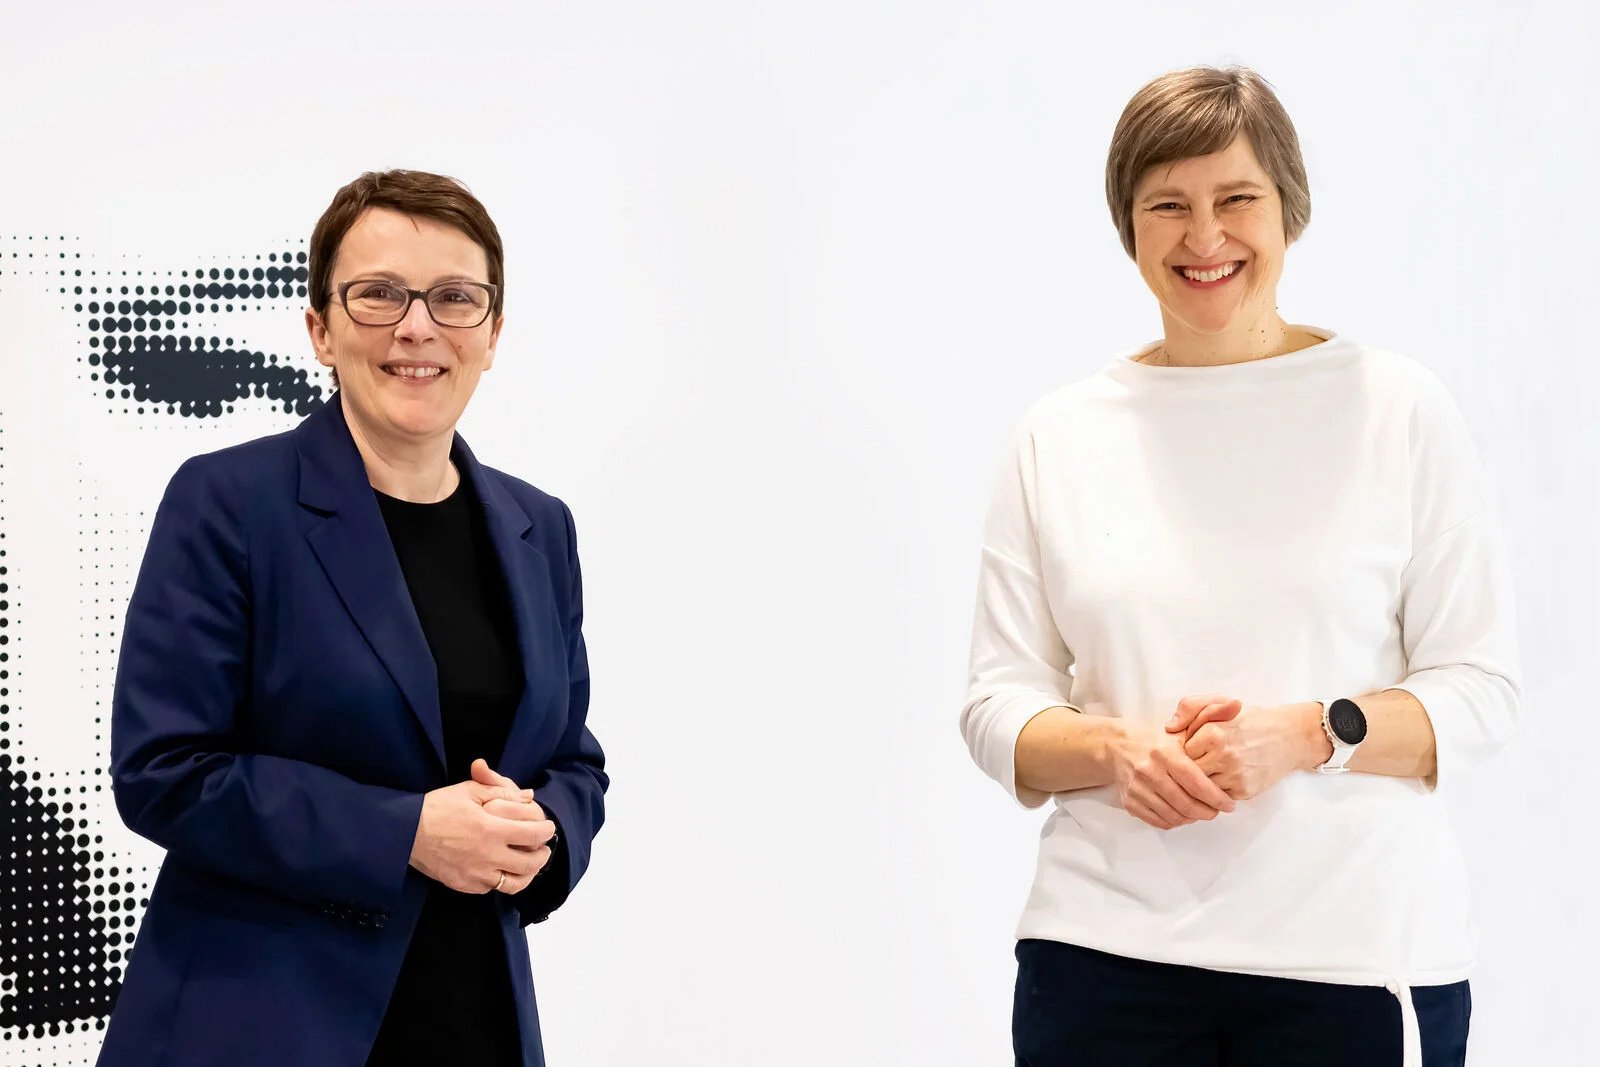  Annette Rinck, President of Leica Microsystems, and Uta Henssge, Coordinator and Deputy Managing Director of Mentoring Hessen, sealing the partnership